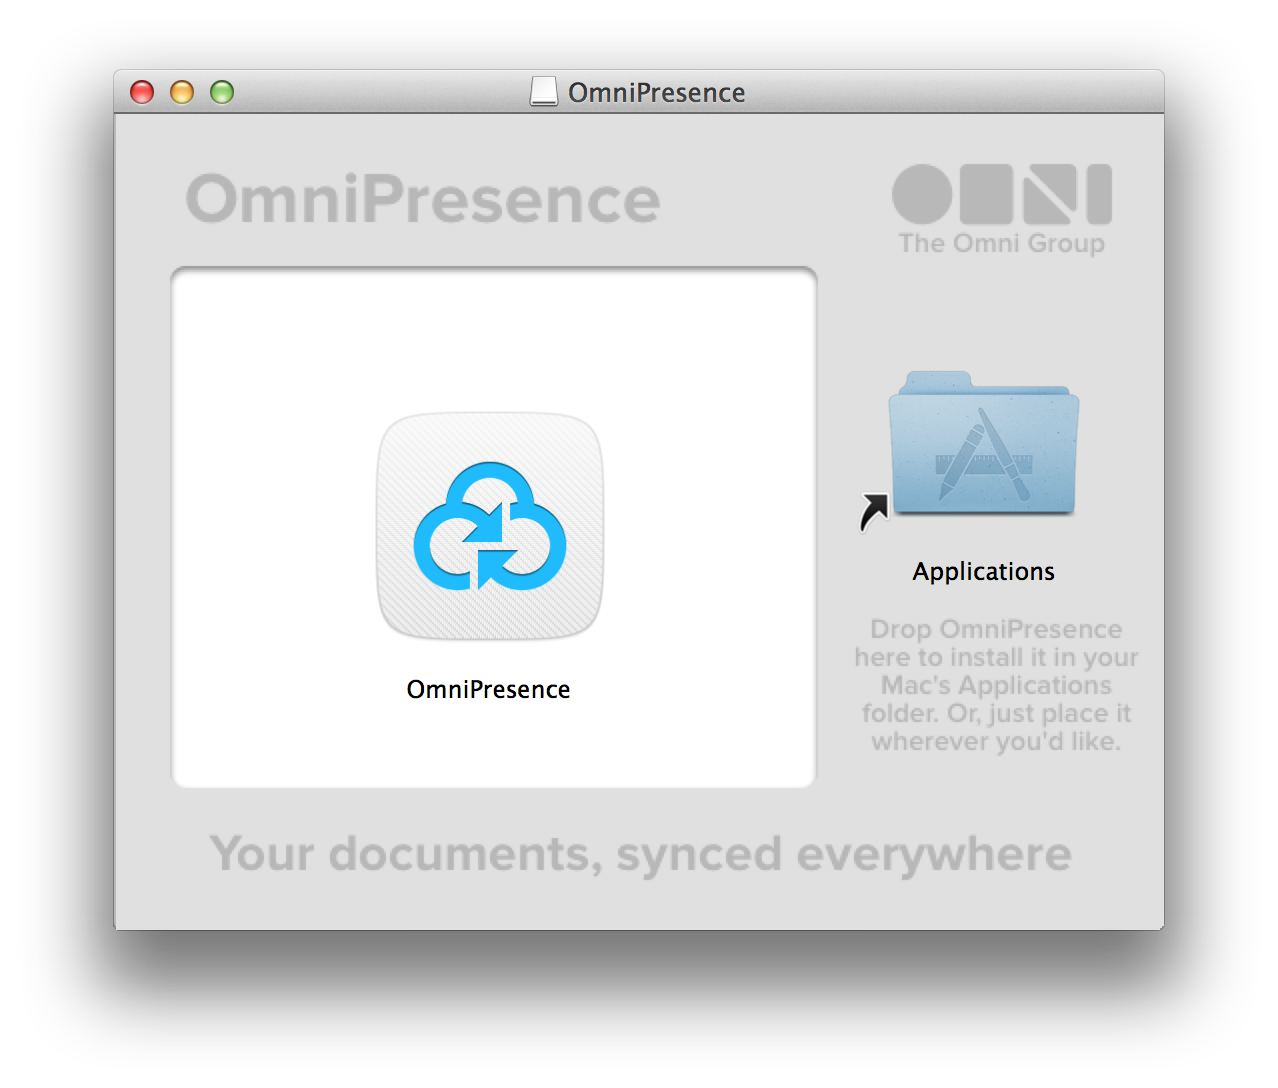 Drag the OmniPresence.app icon over to the Applications folder to install it on your Mac